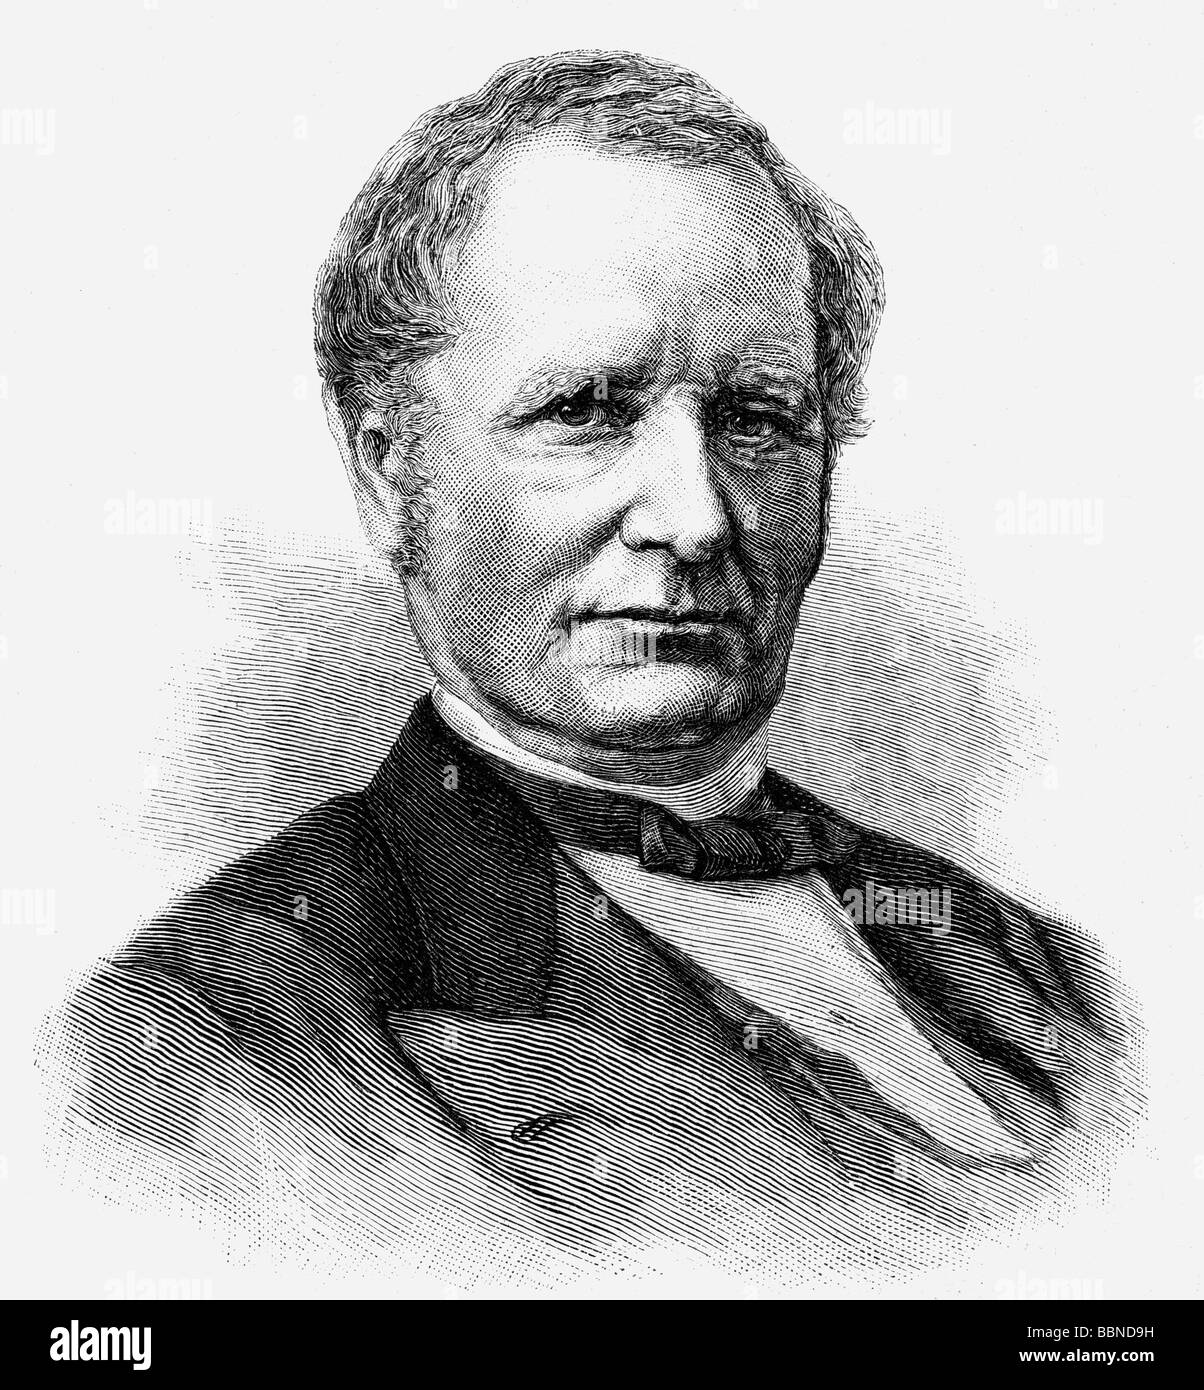 Hendricks, Thomas Andrew, 7.9.1819 - 25.11.1885, American politician and jurist, candidate of Democrates, portrait, wood engraving, 1868, Stock Photo